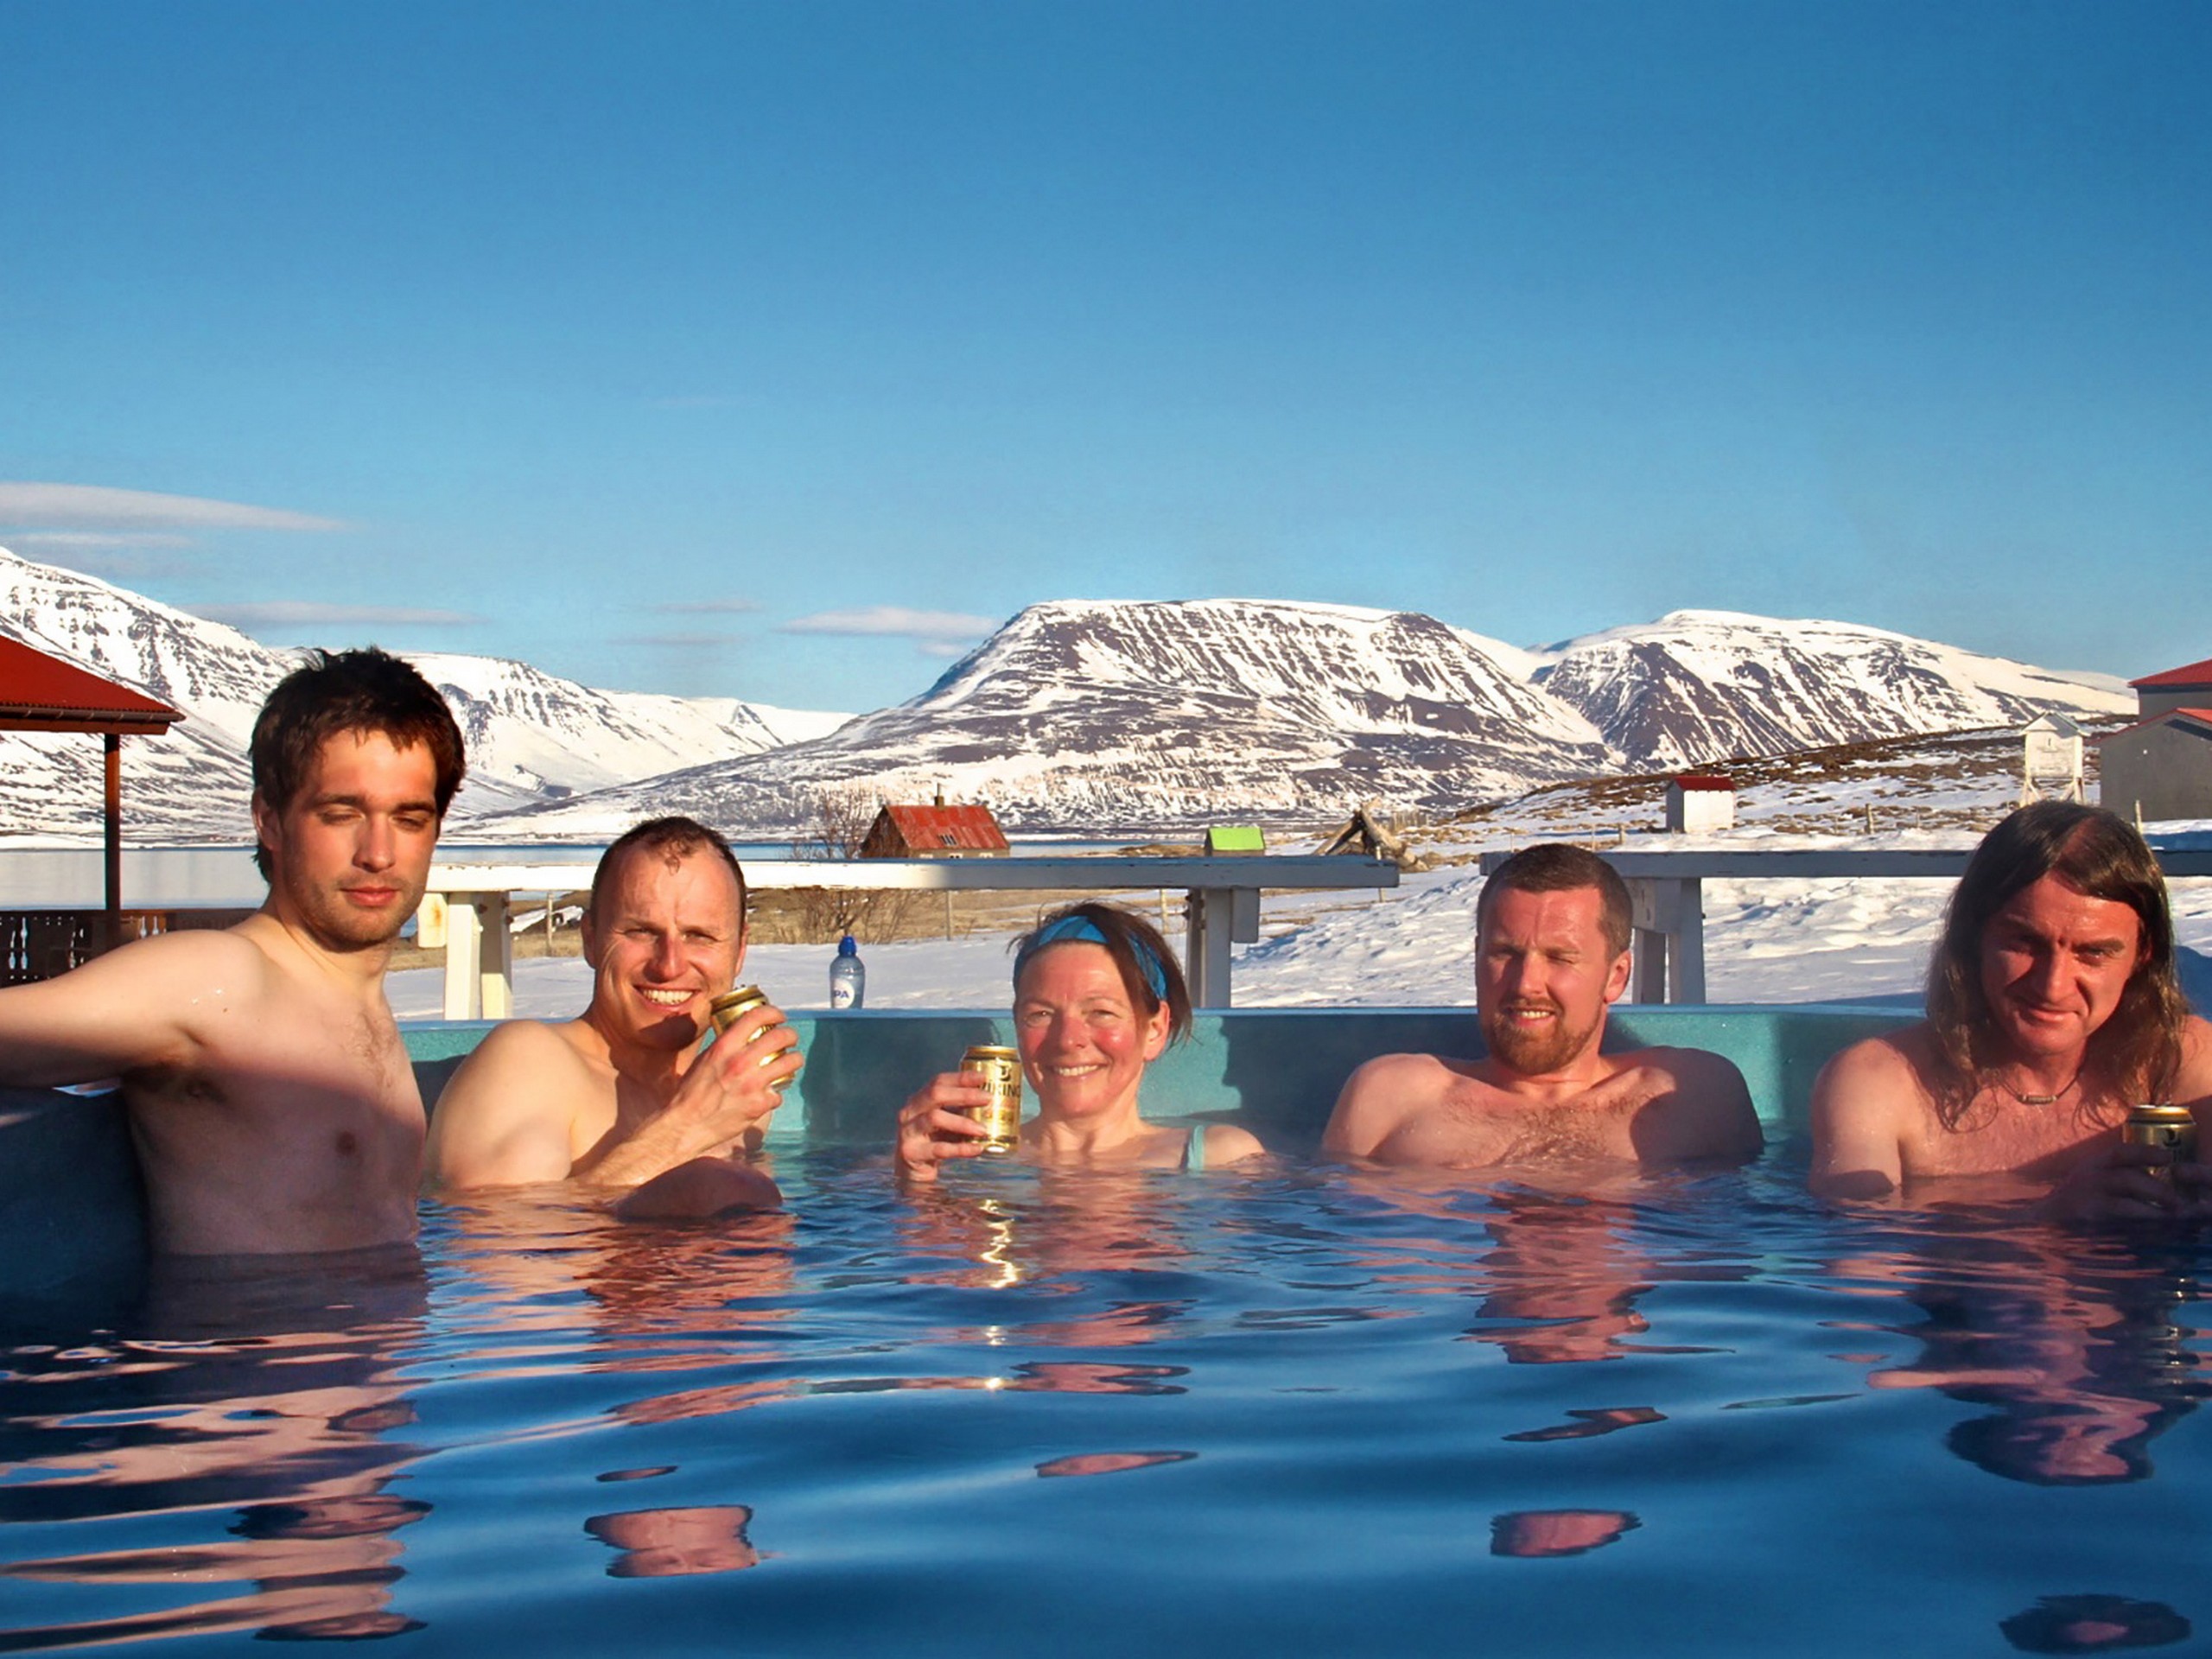 Group of skiers relaxing after a long day of skiing in Iceland - Photo by Jan Zelina